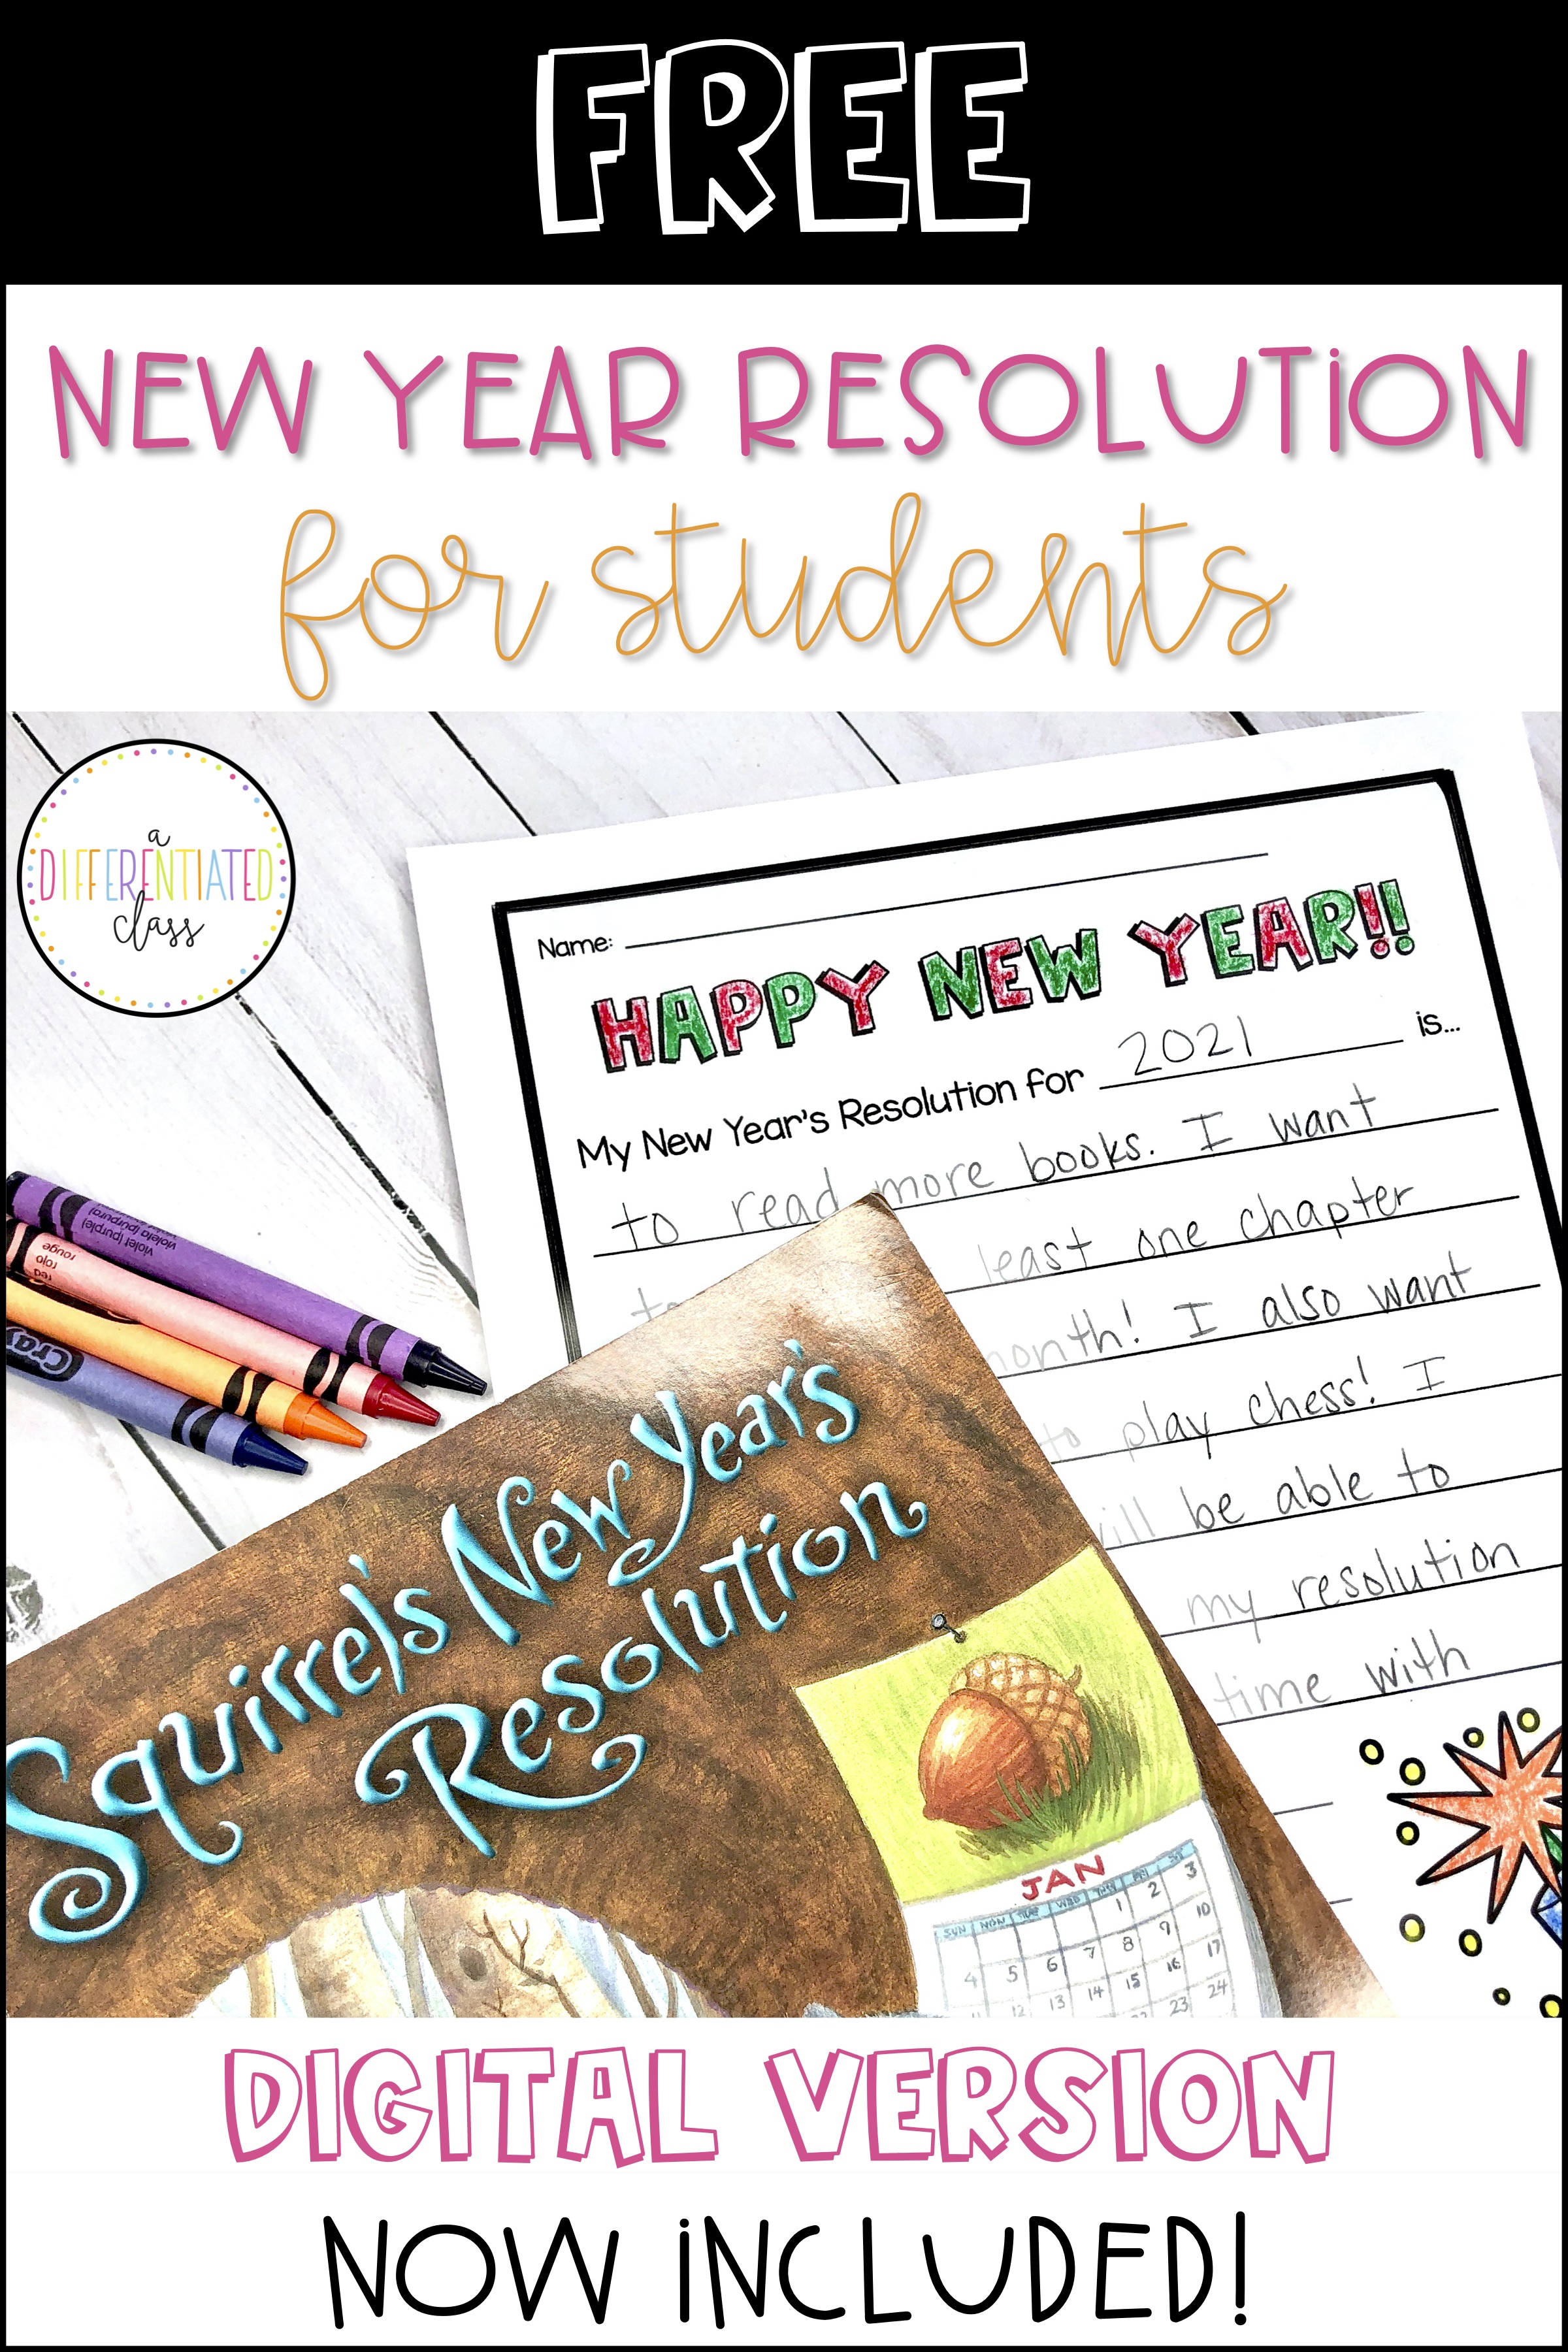 free new year resolution for students image